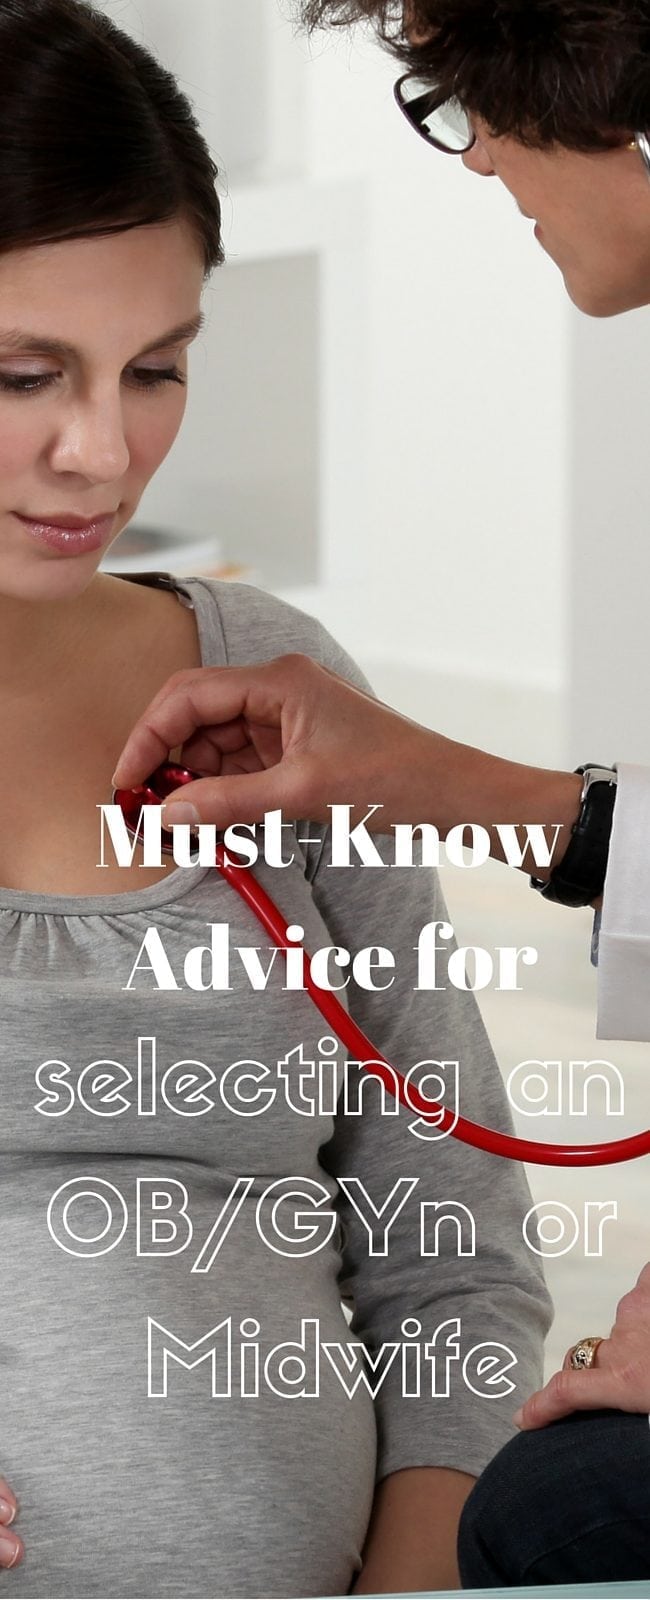 Choosing your OBGYN or Midwife is very important - here is some advice for choosing the best one for you. 